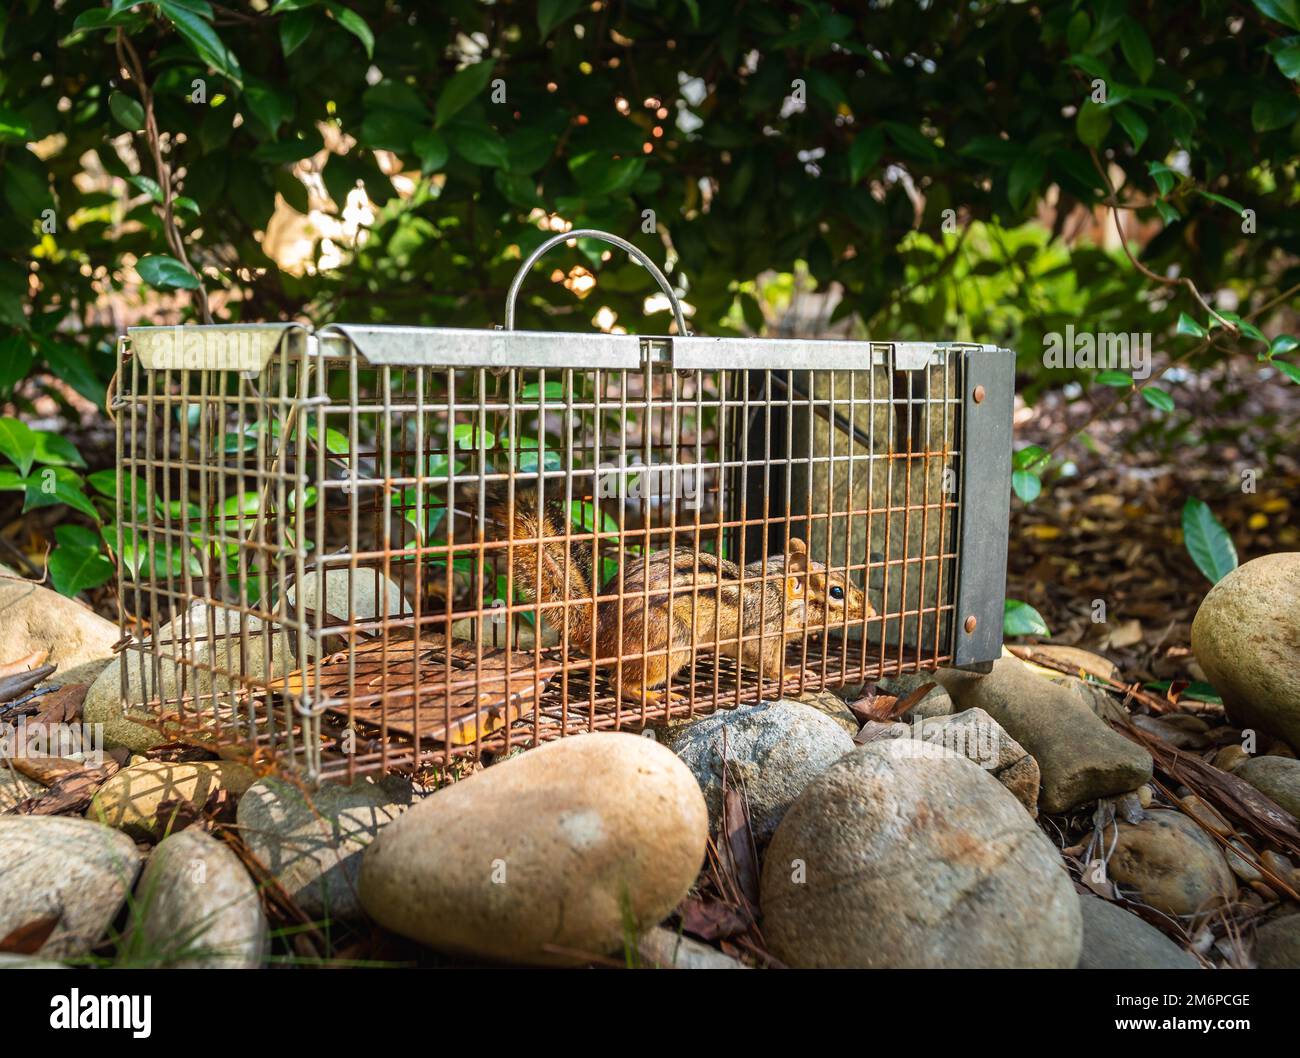 https://c8.alamy.com/comp/2M6PCGE/chipmunk-in-live-humane-trap-pest-and-rodent-removal-cage-catch-and-release-wildlife-animal-control-service-2M6PCGE.jpg